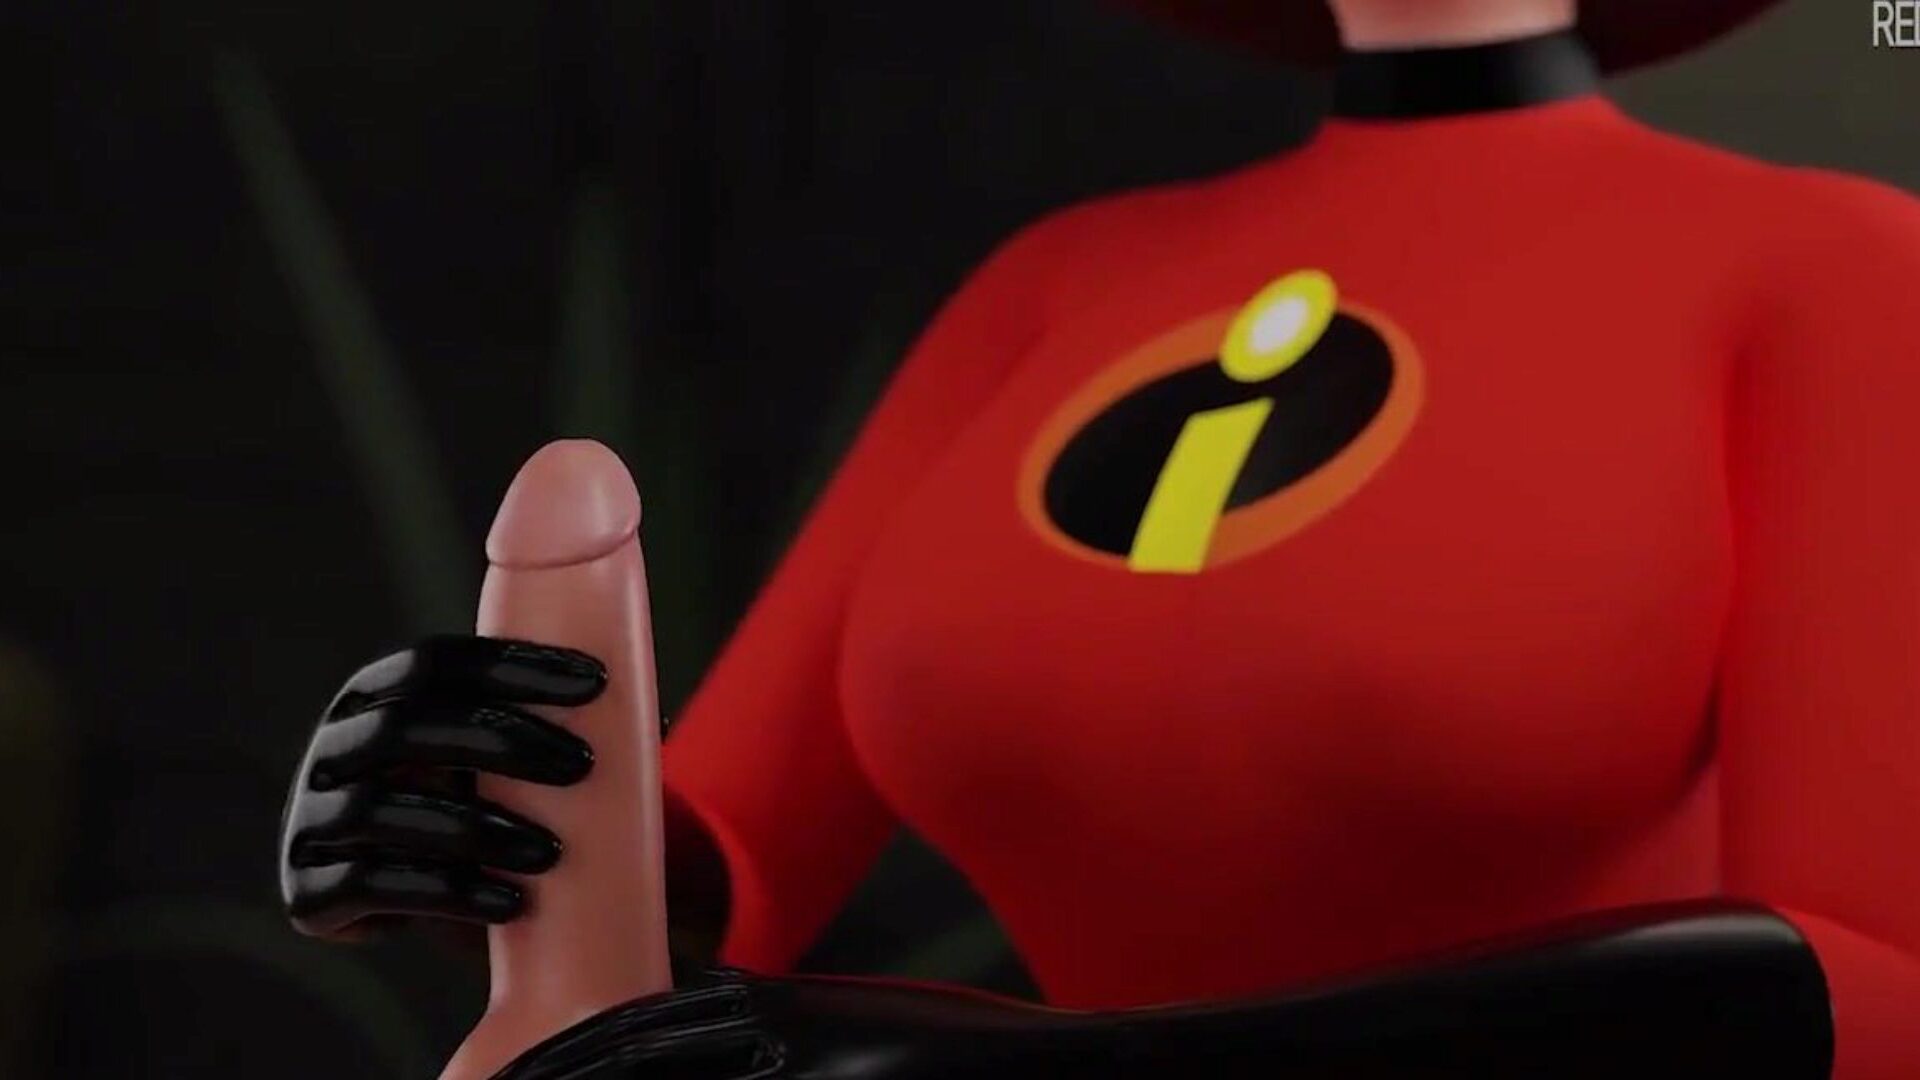 The Incredibles Helena, Free Hentai Porn Video 01: xHamster Watch The Incredibles Helena movie on xHamster, the finest HD hook-up tube website with tons of free Hentai hardcore pornography videos to blast or download